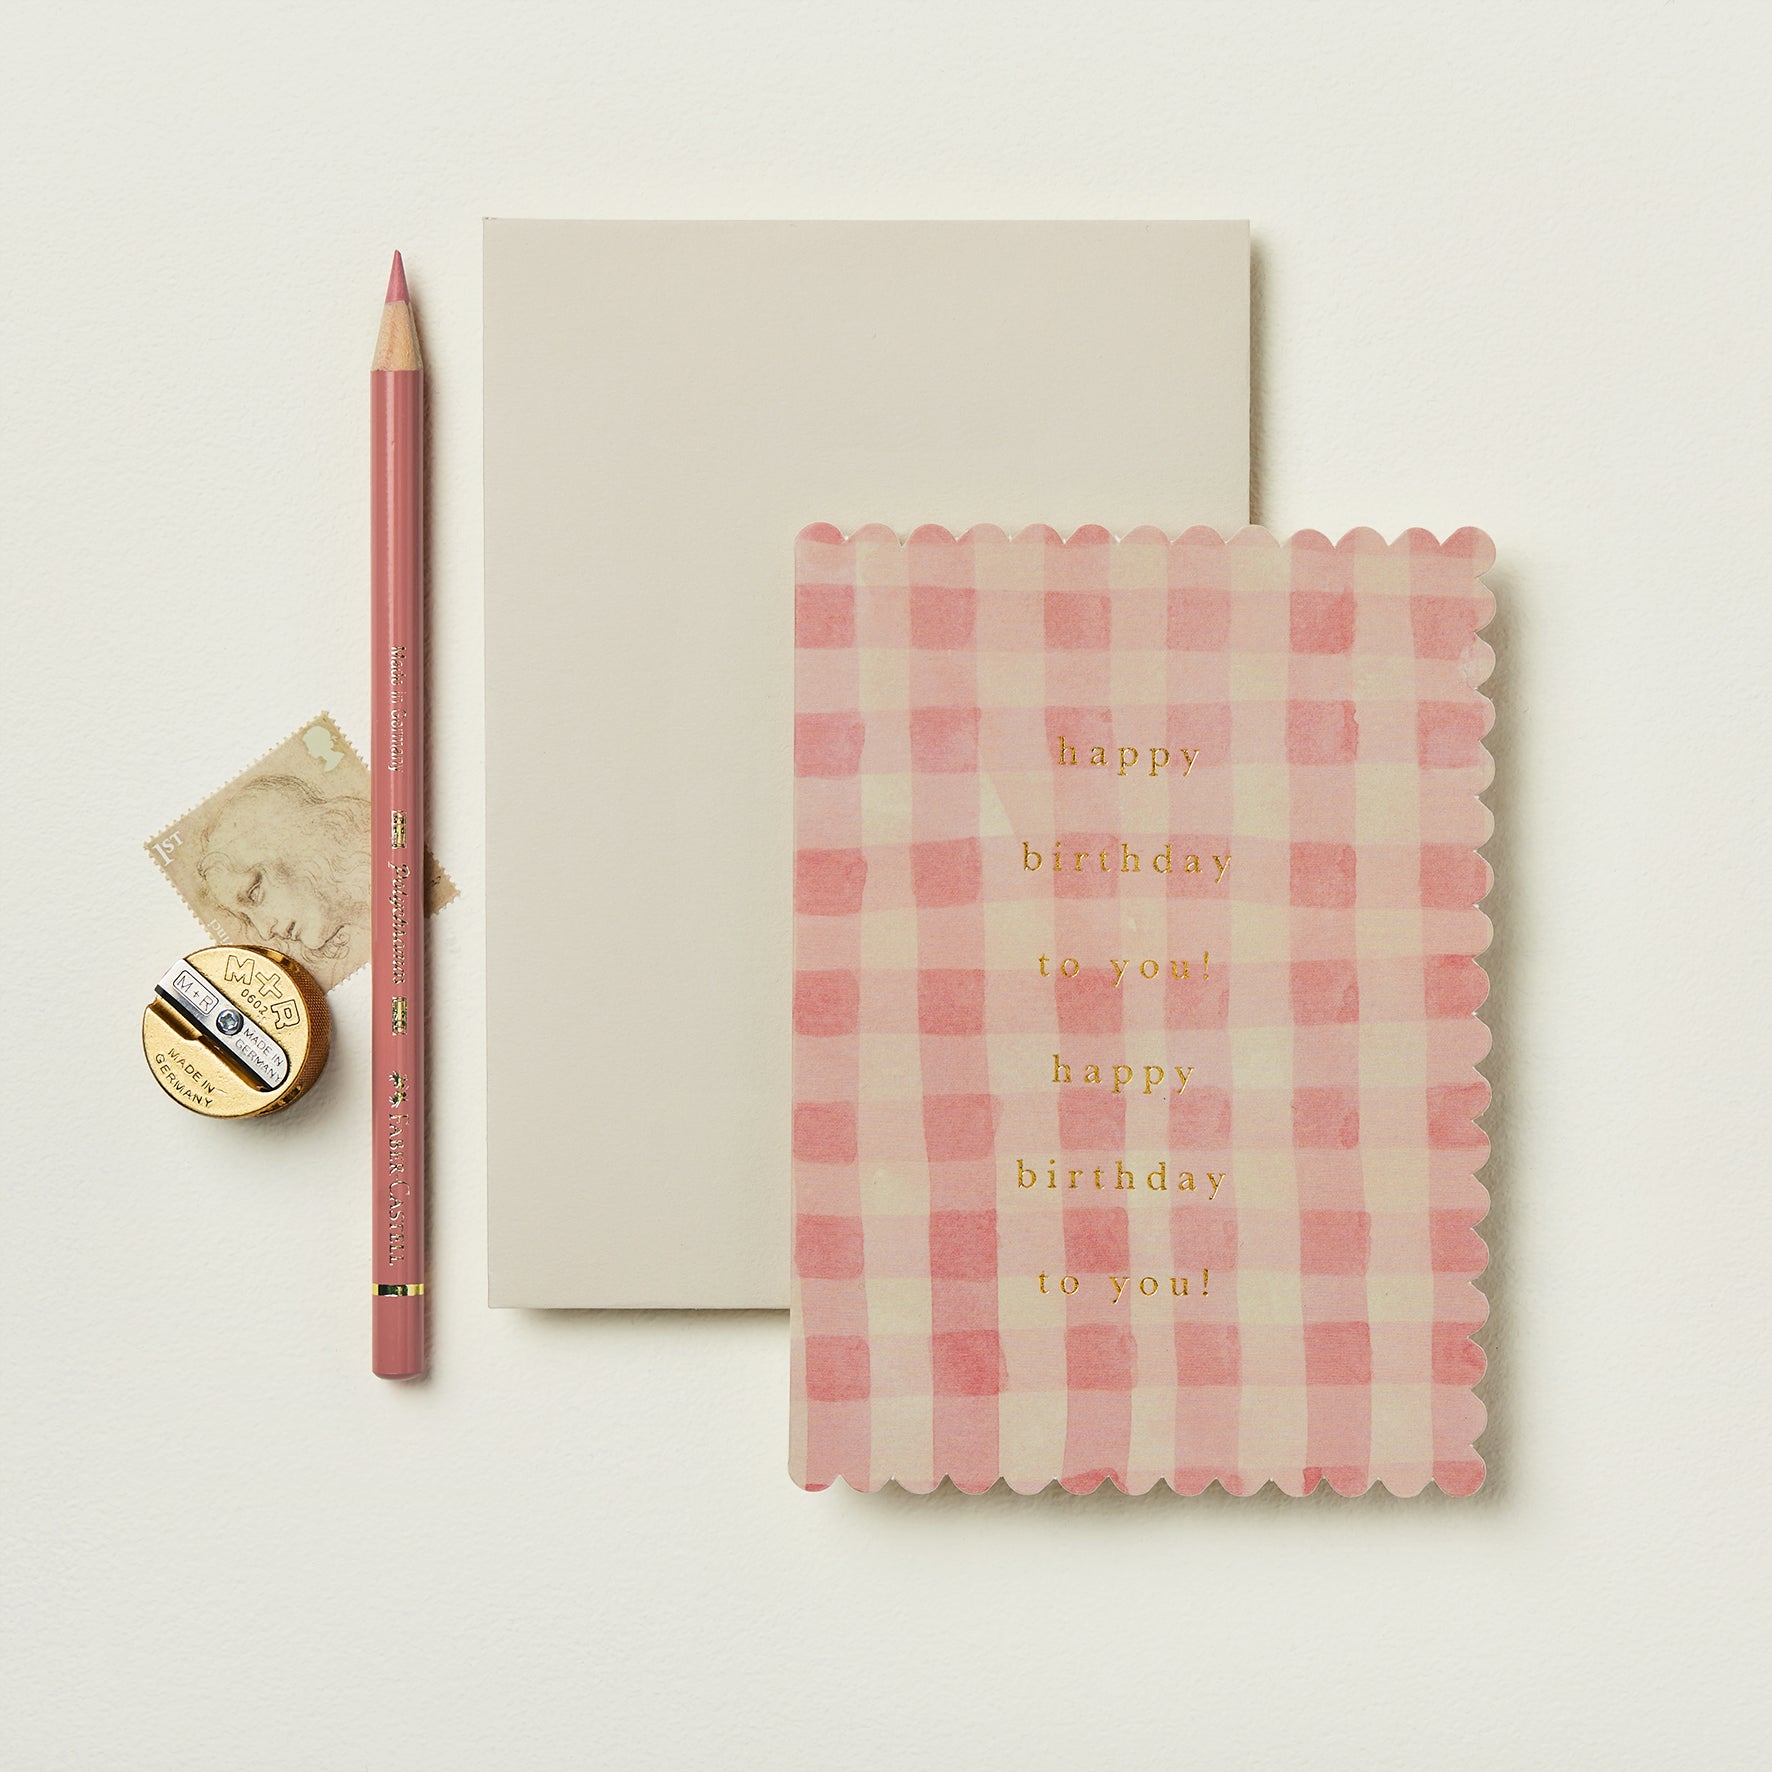 'Happy Birthday to You!' Pink Gingham Greetings Card